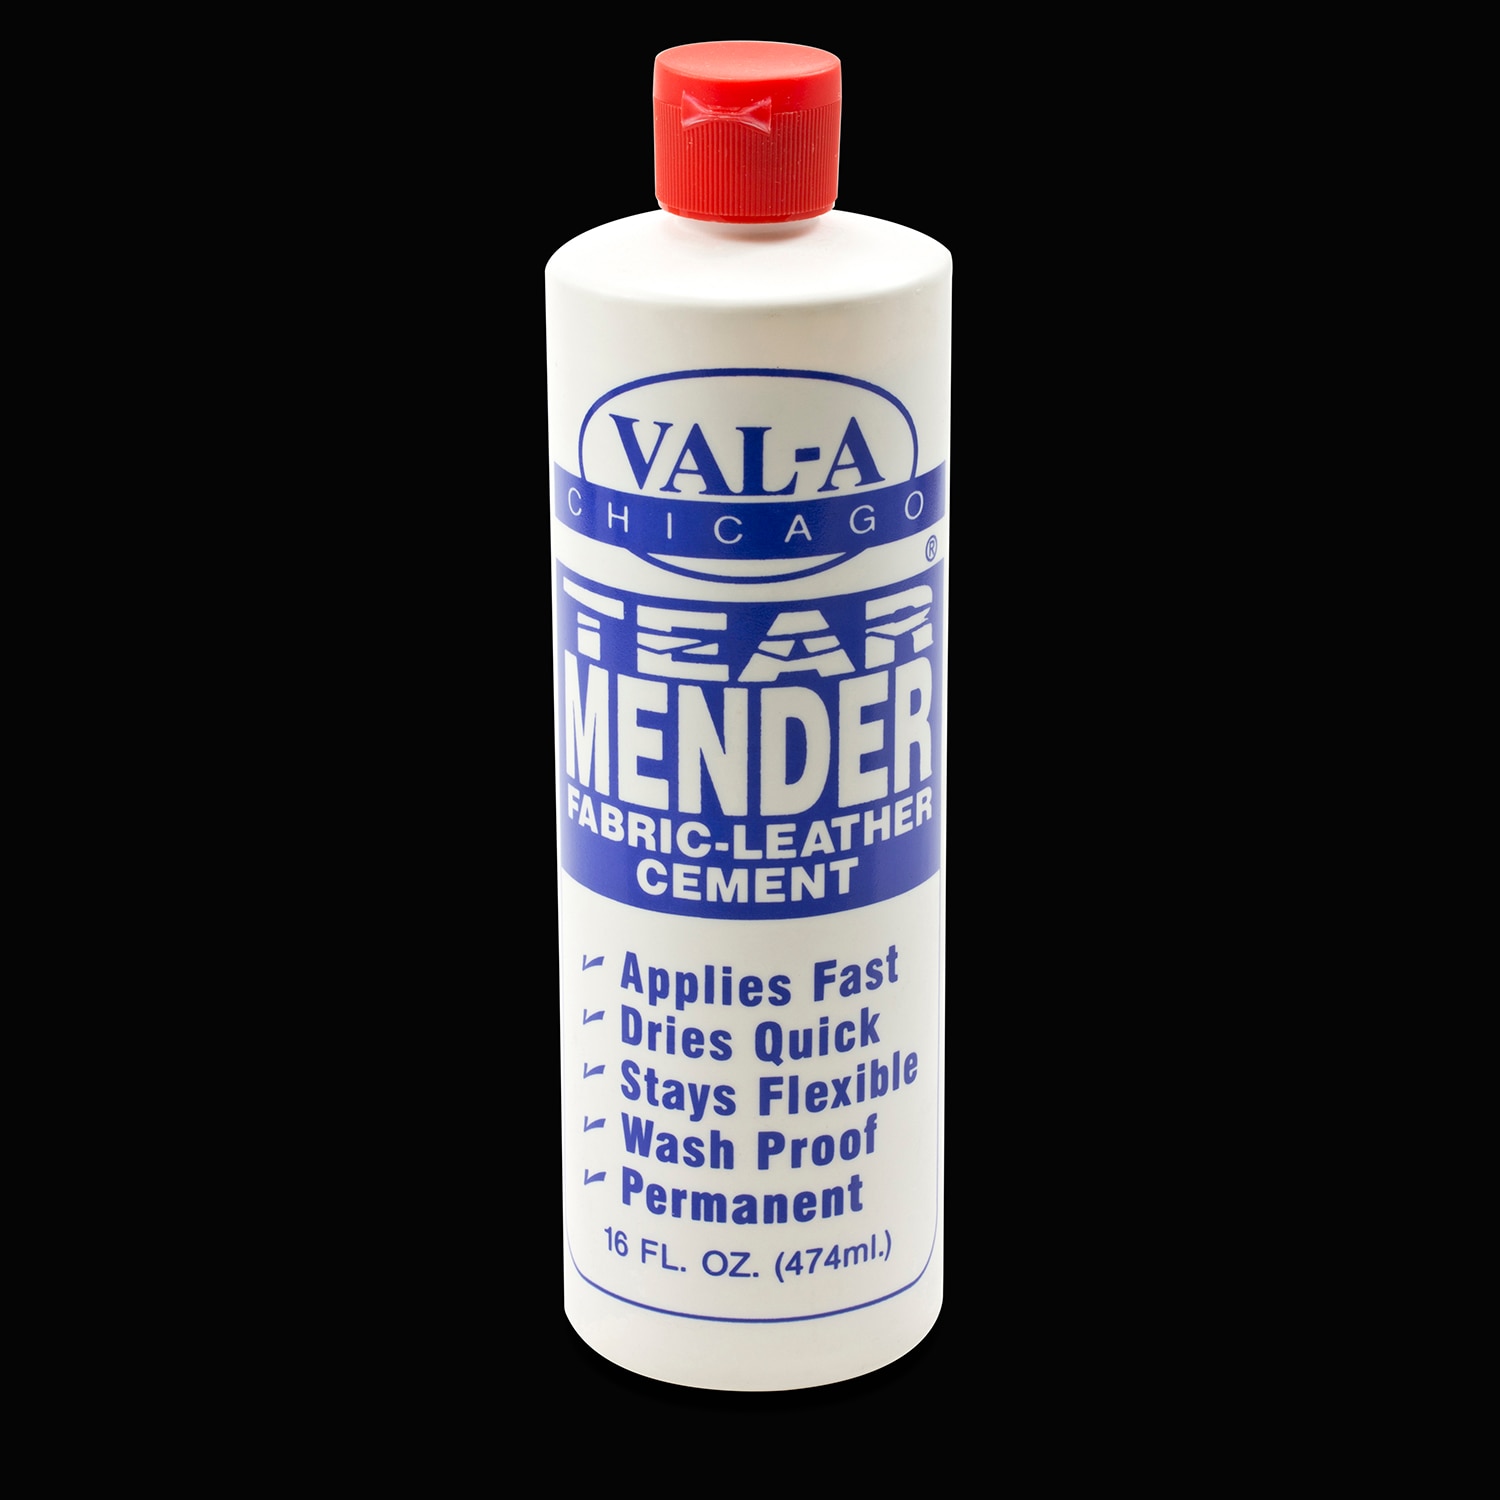 Tear Mender Instant Fabric and Leather Adhesive, 2 oz Bottle